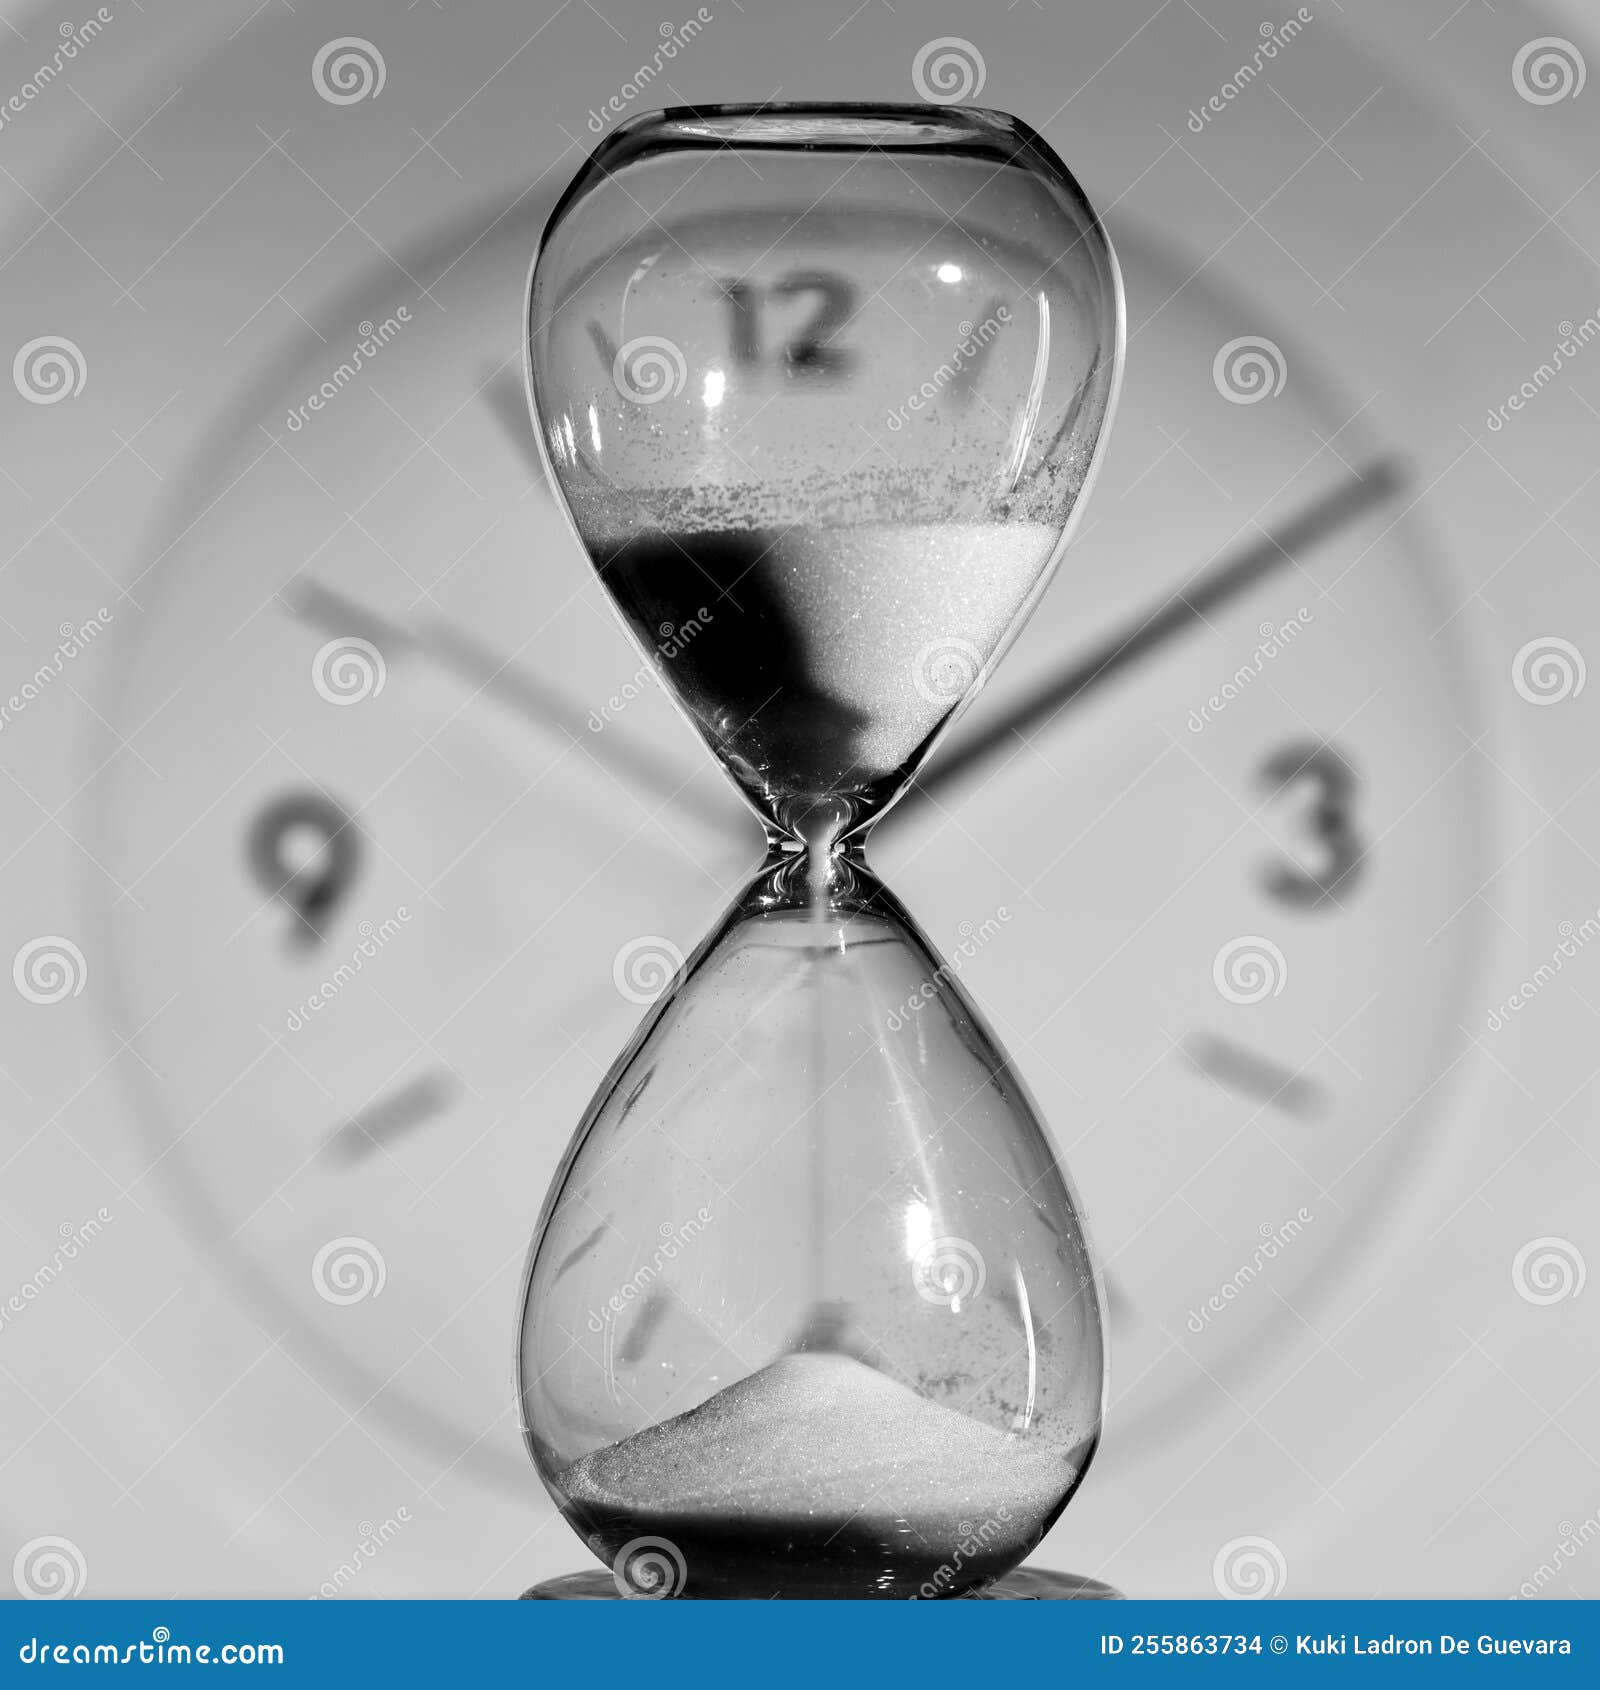 hourglass and round clock measuring time